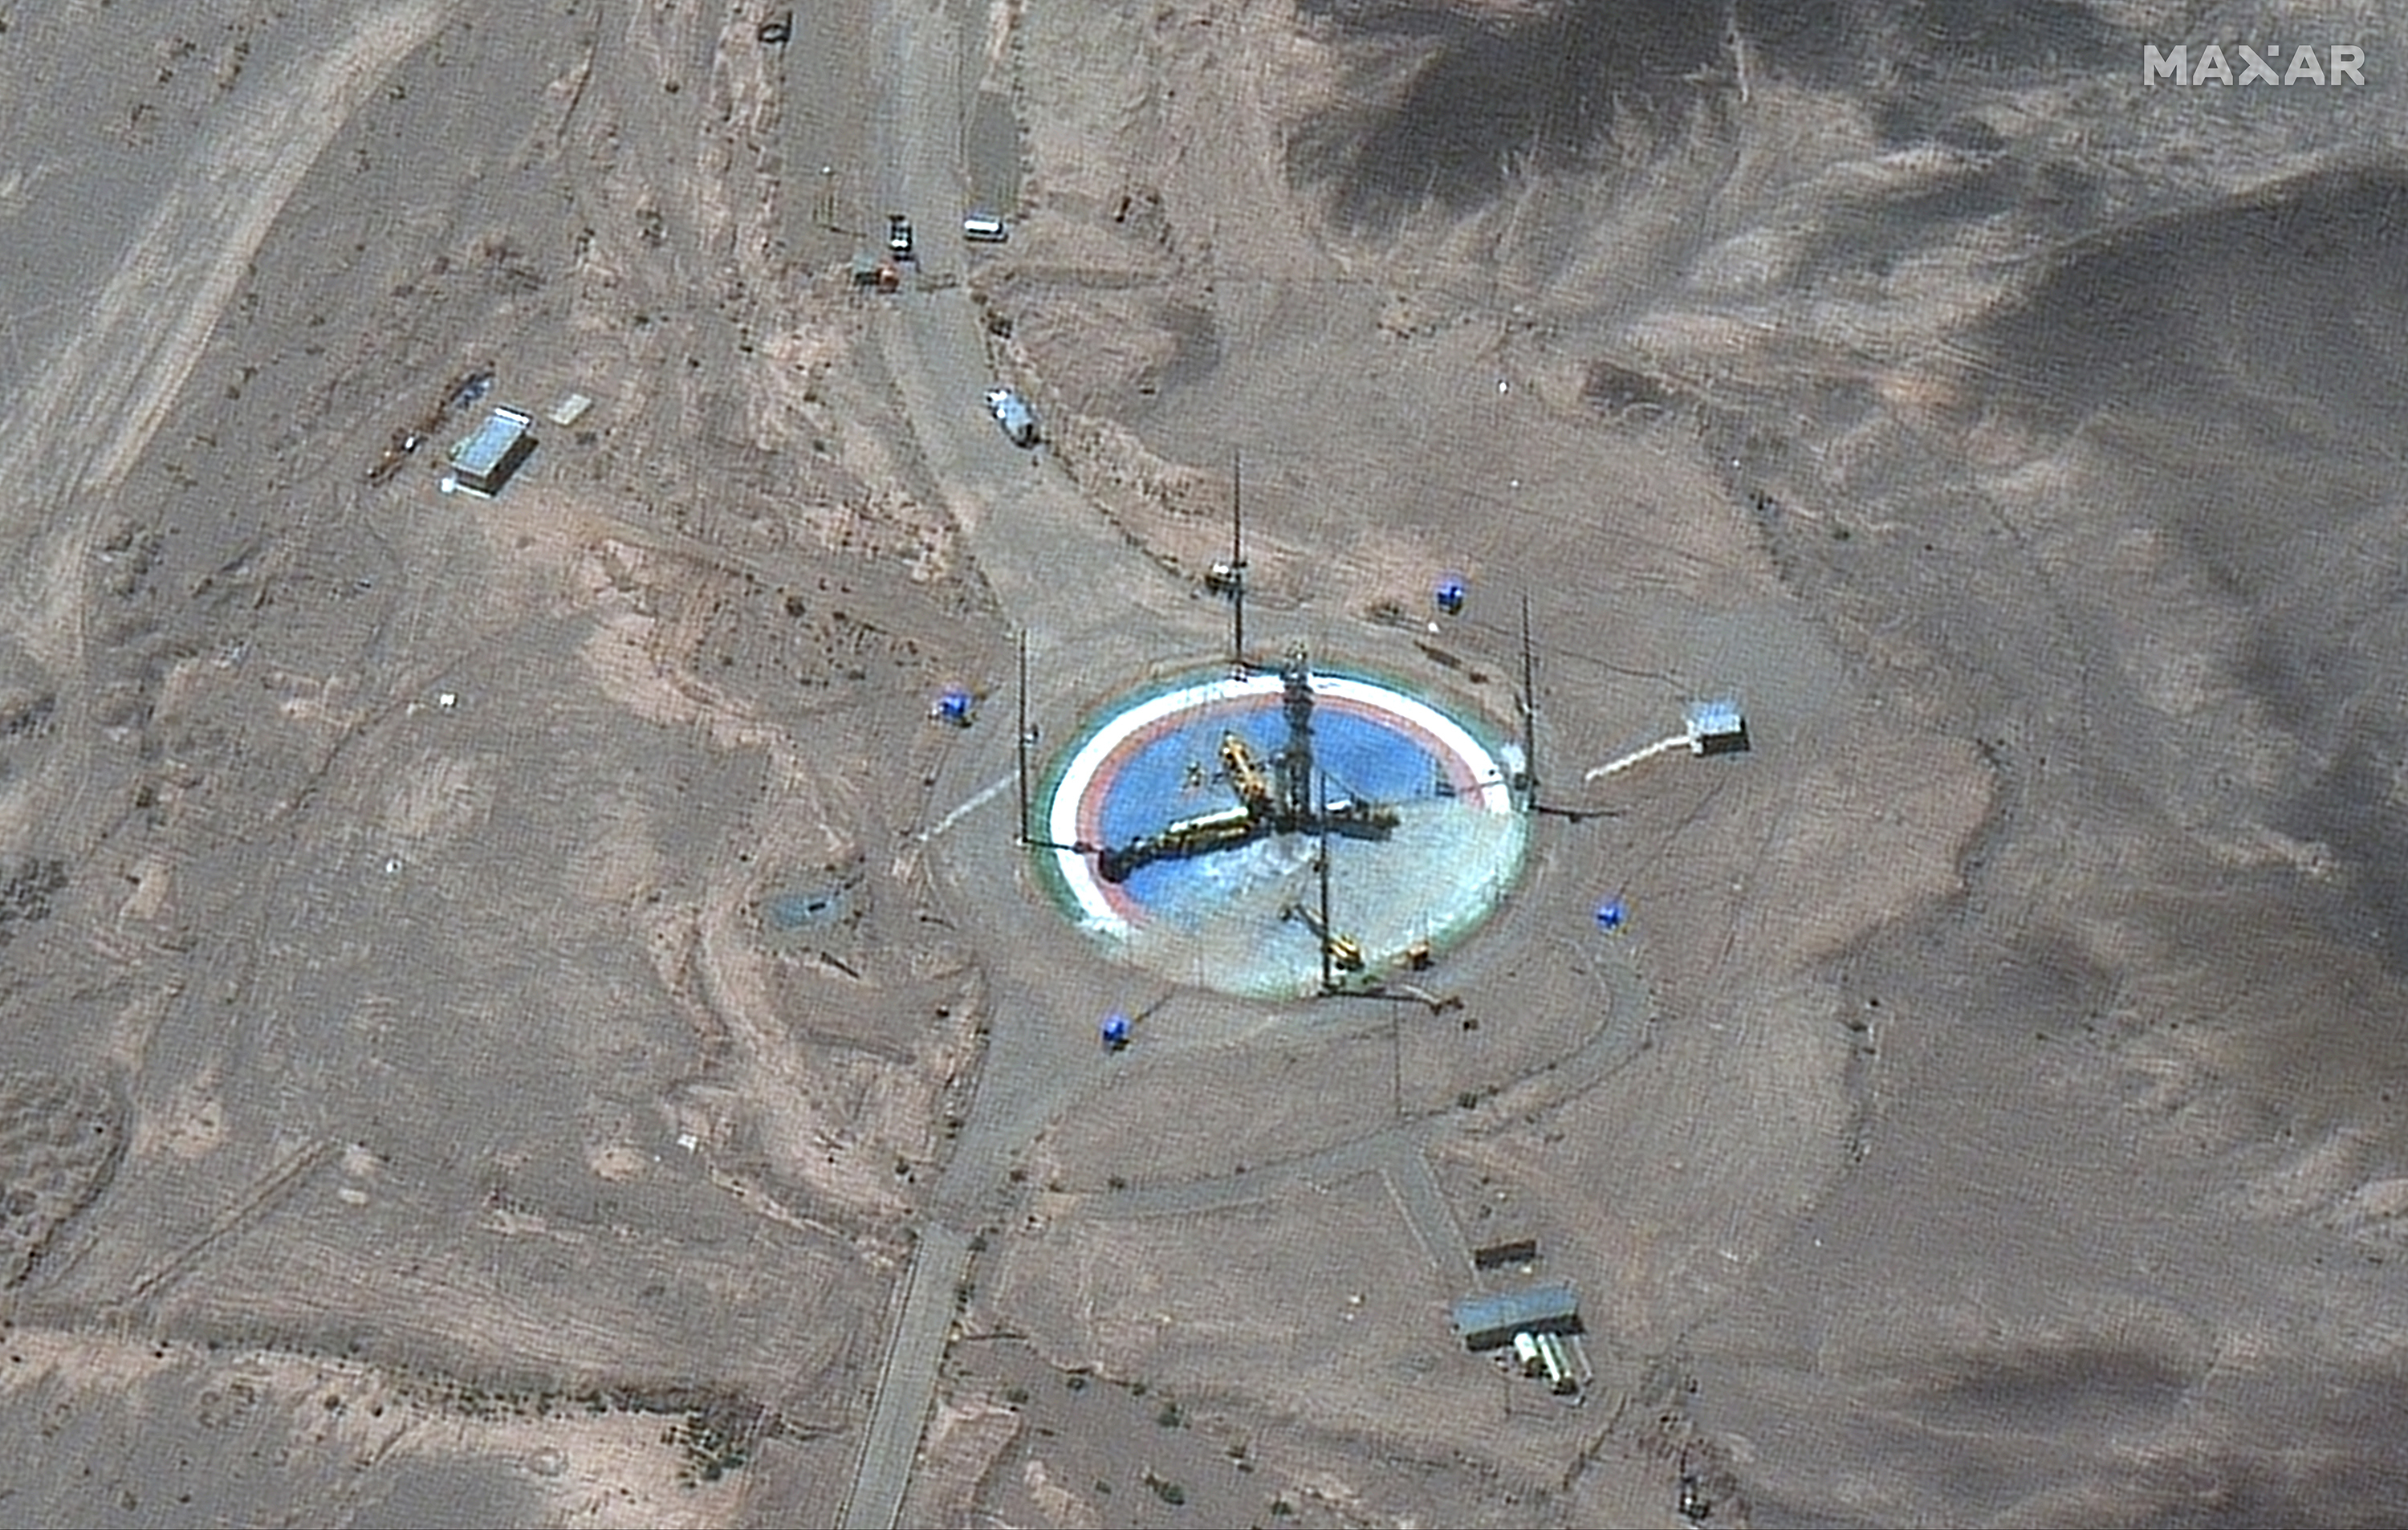 A satellite image shows a rocket preparing to be erected at a launch pad 